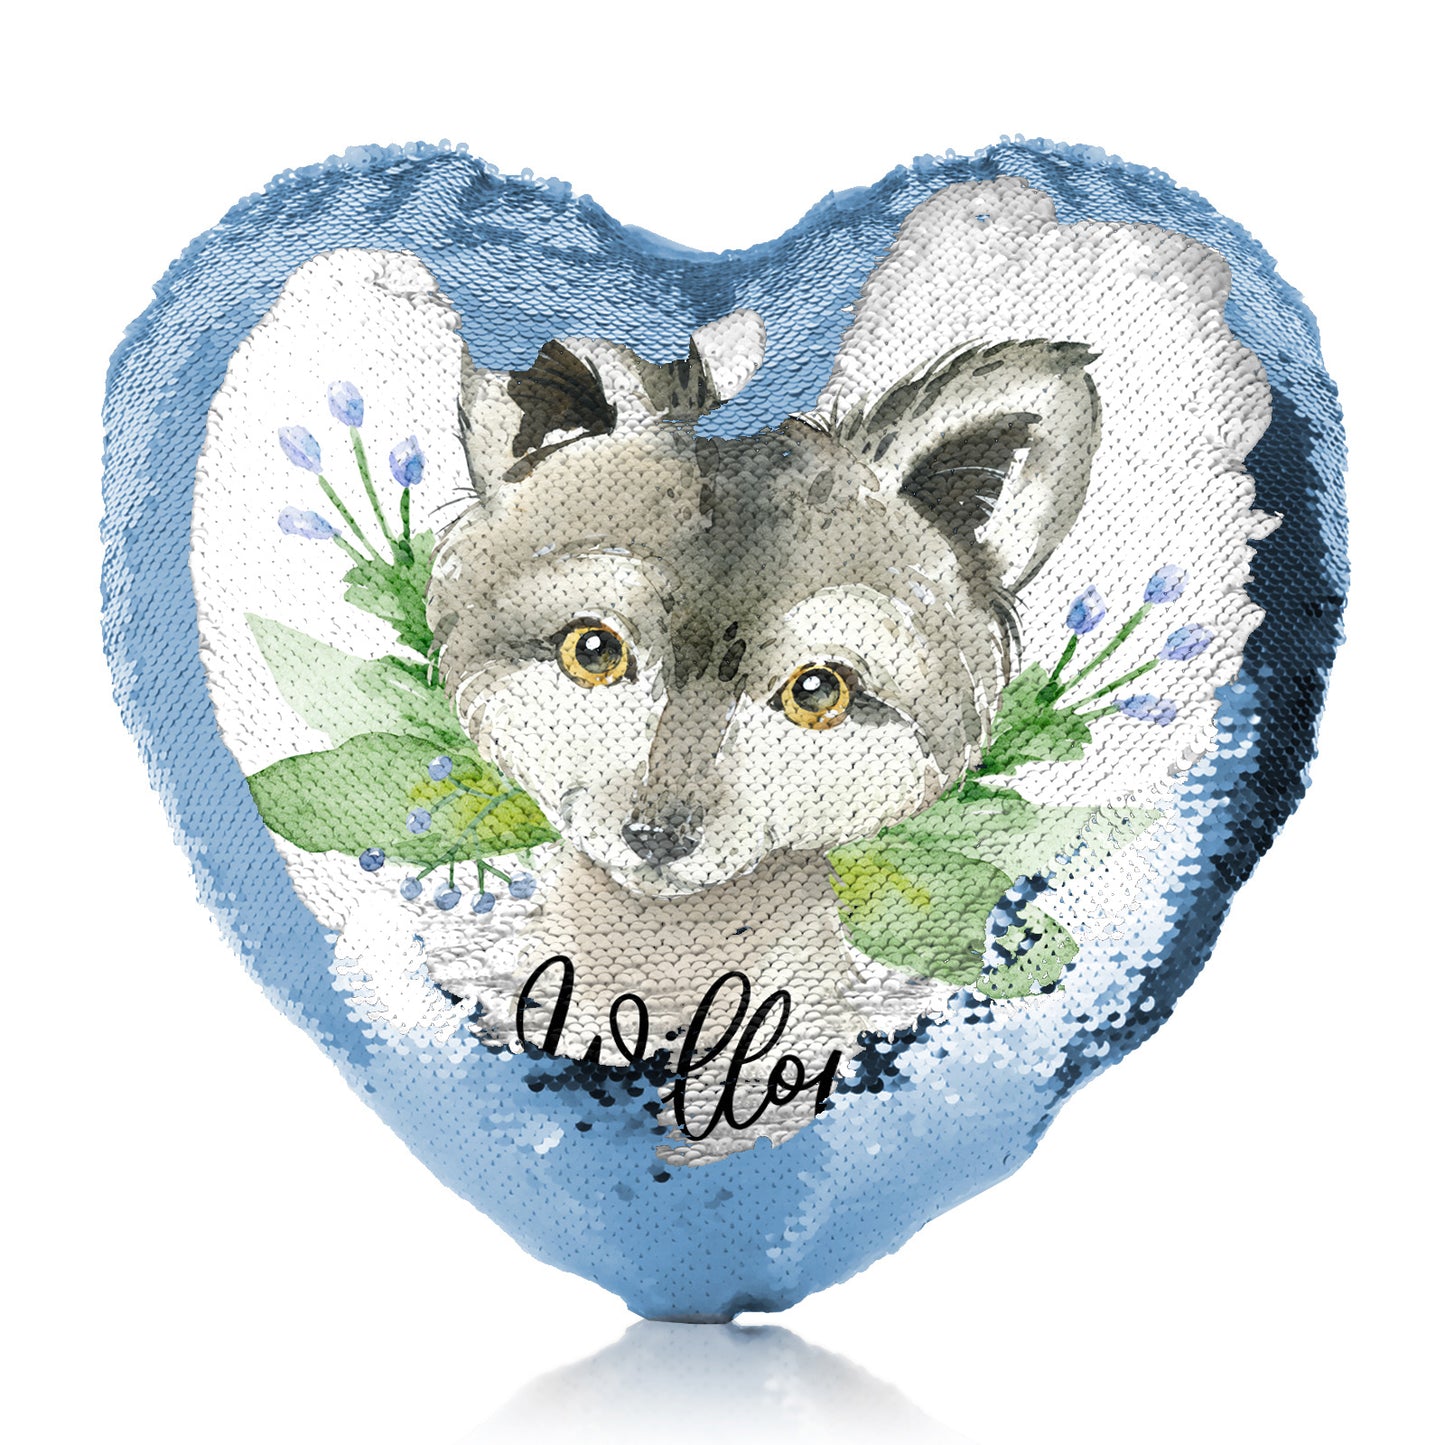 Personalised Sequin Heart Cushion with Grey Wolf Blue Flowers and Cute Text